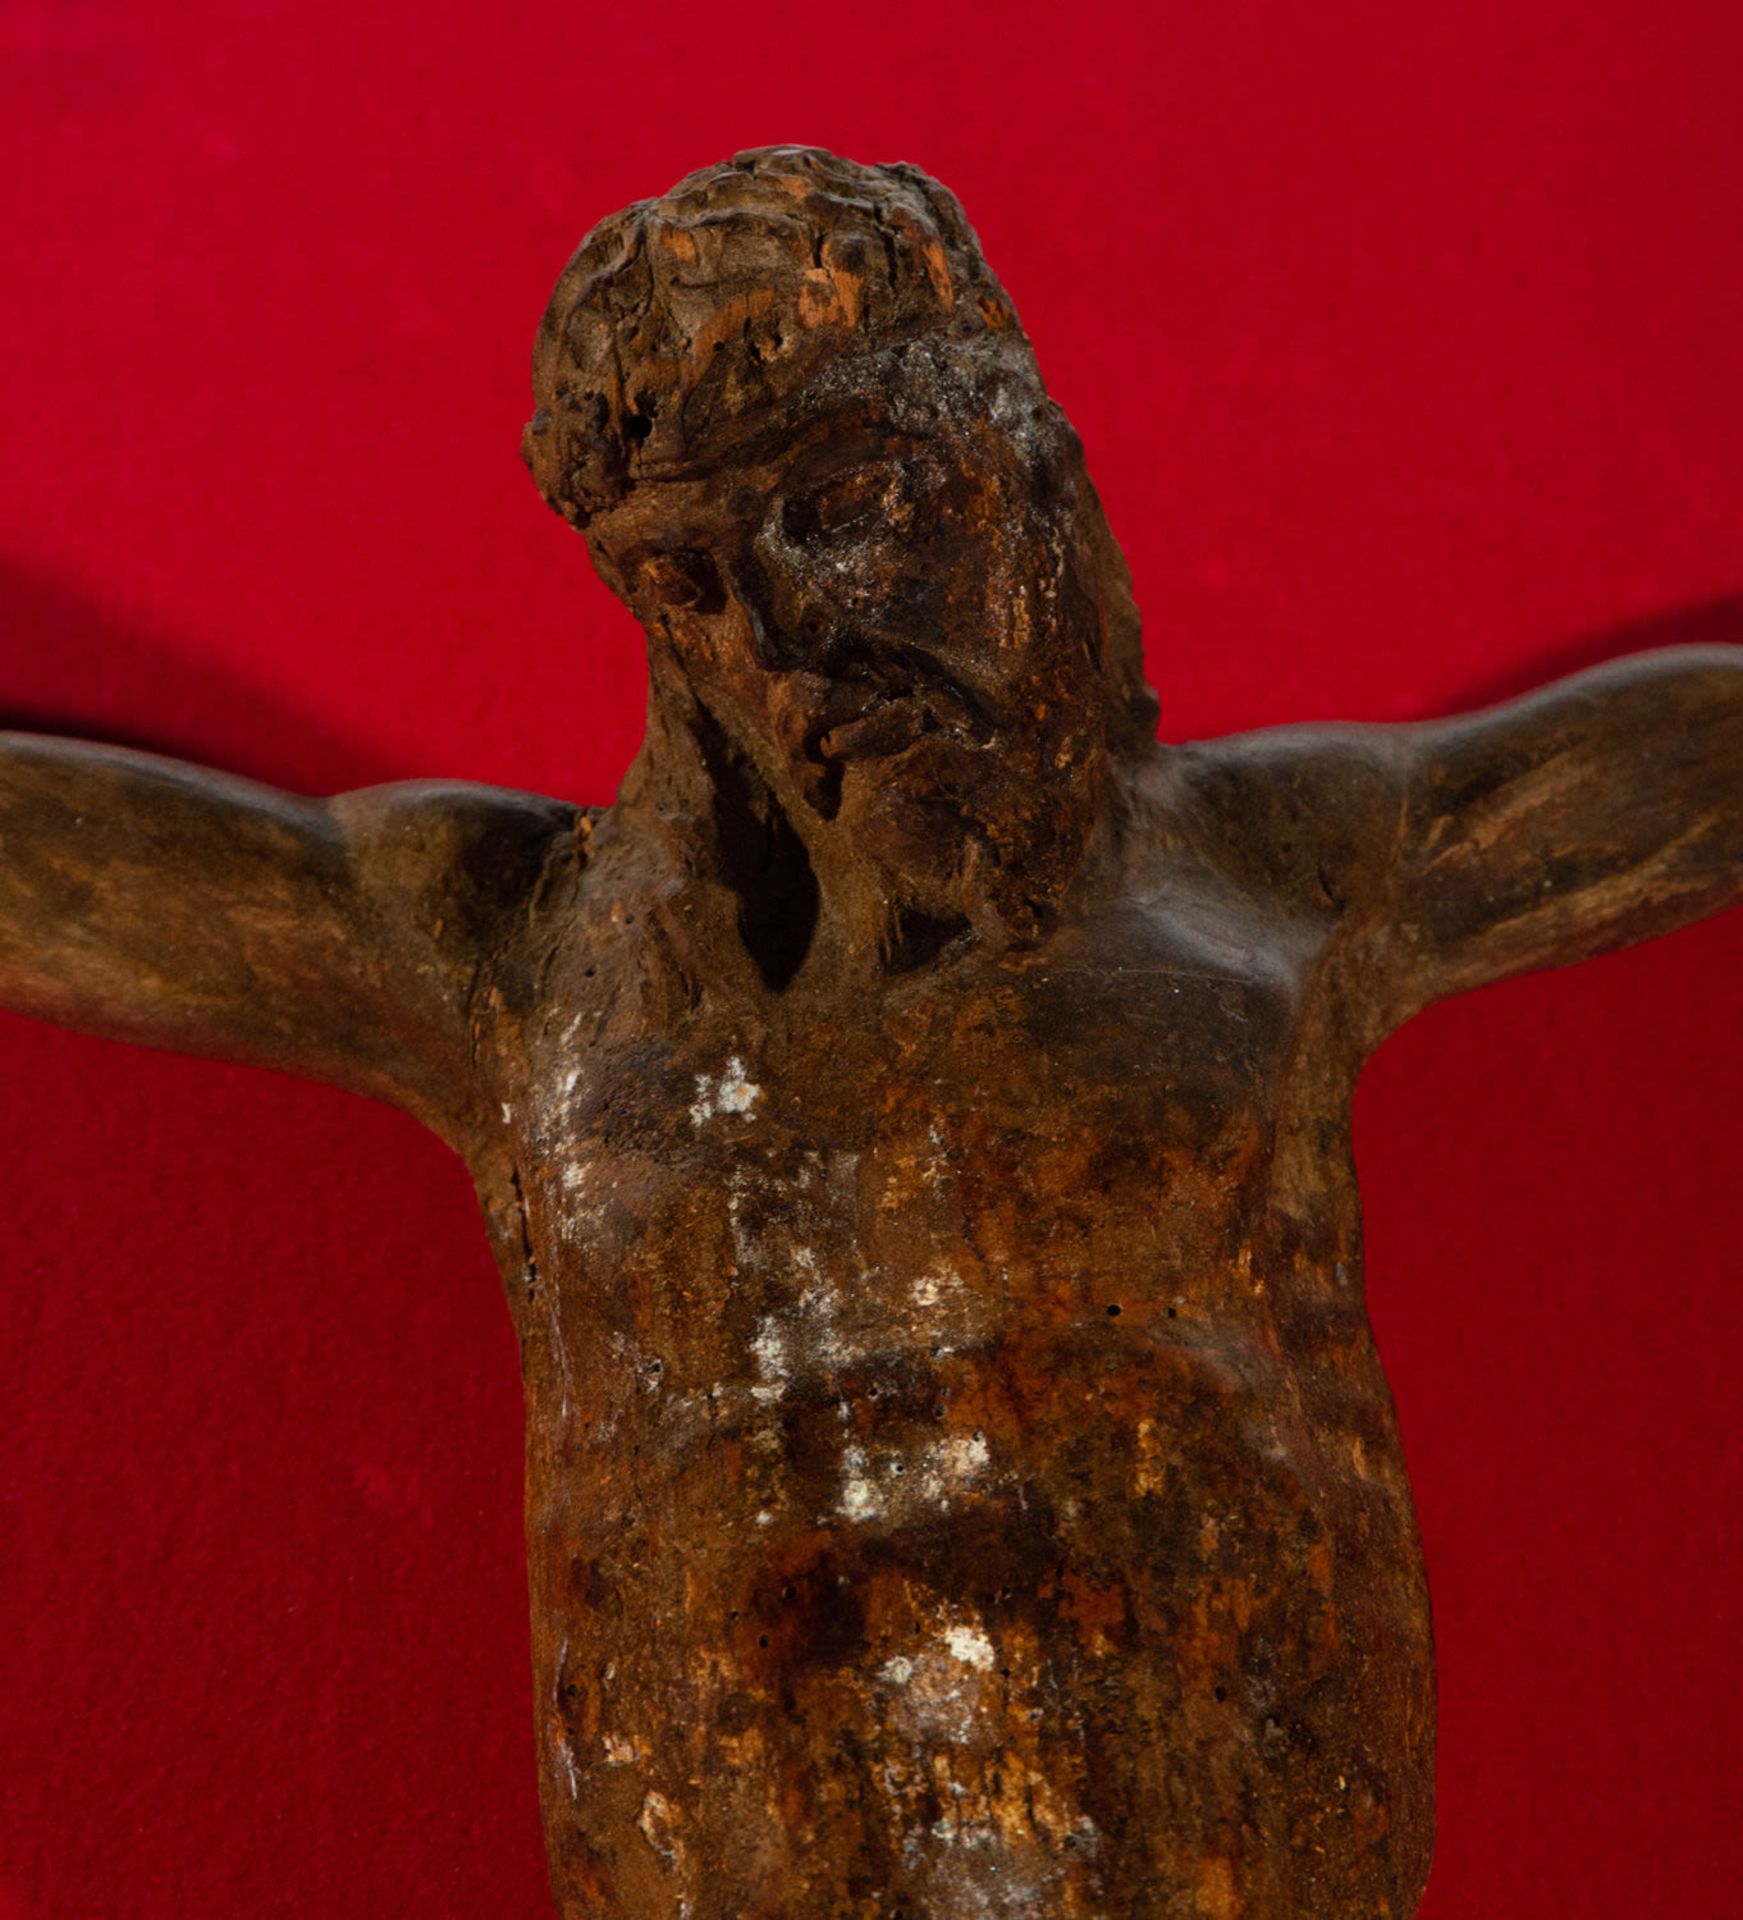 Expiring Christ in Boxwood, Navarra, first half of the 16th century - Image 2 of 4